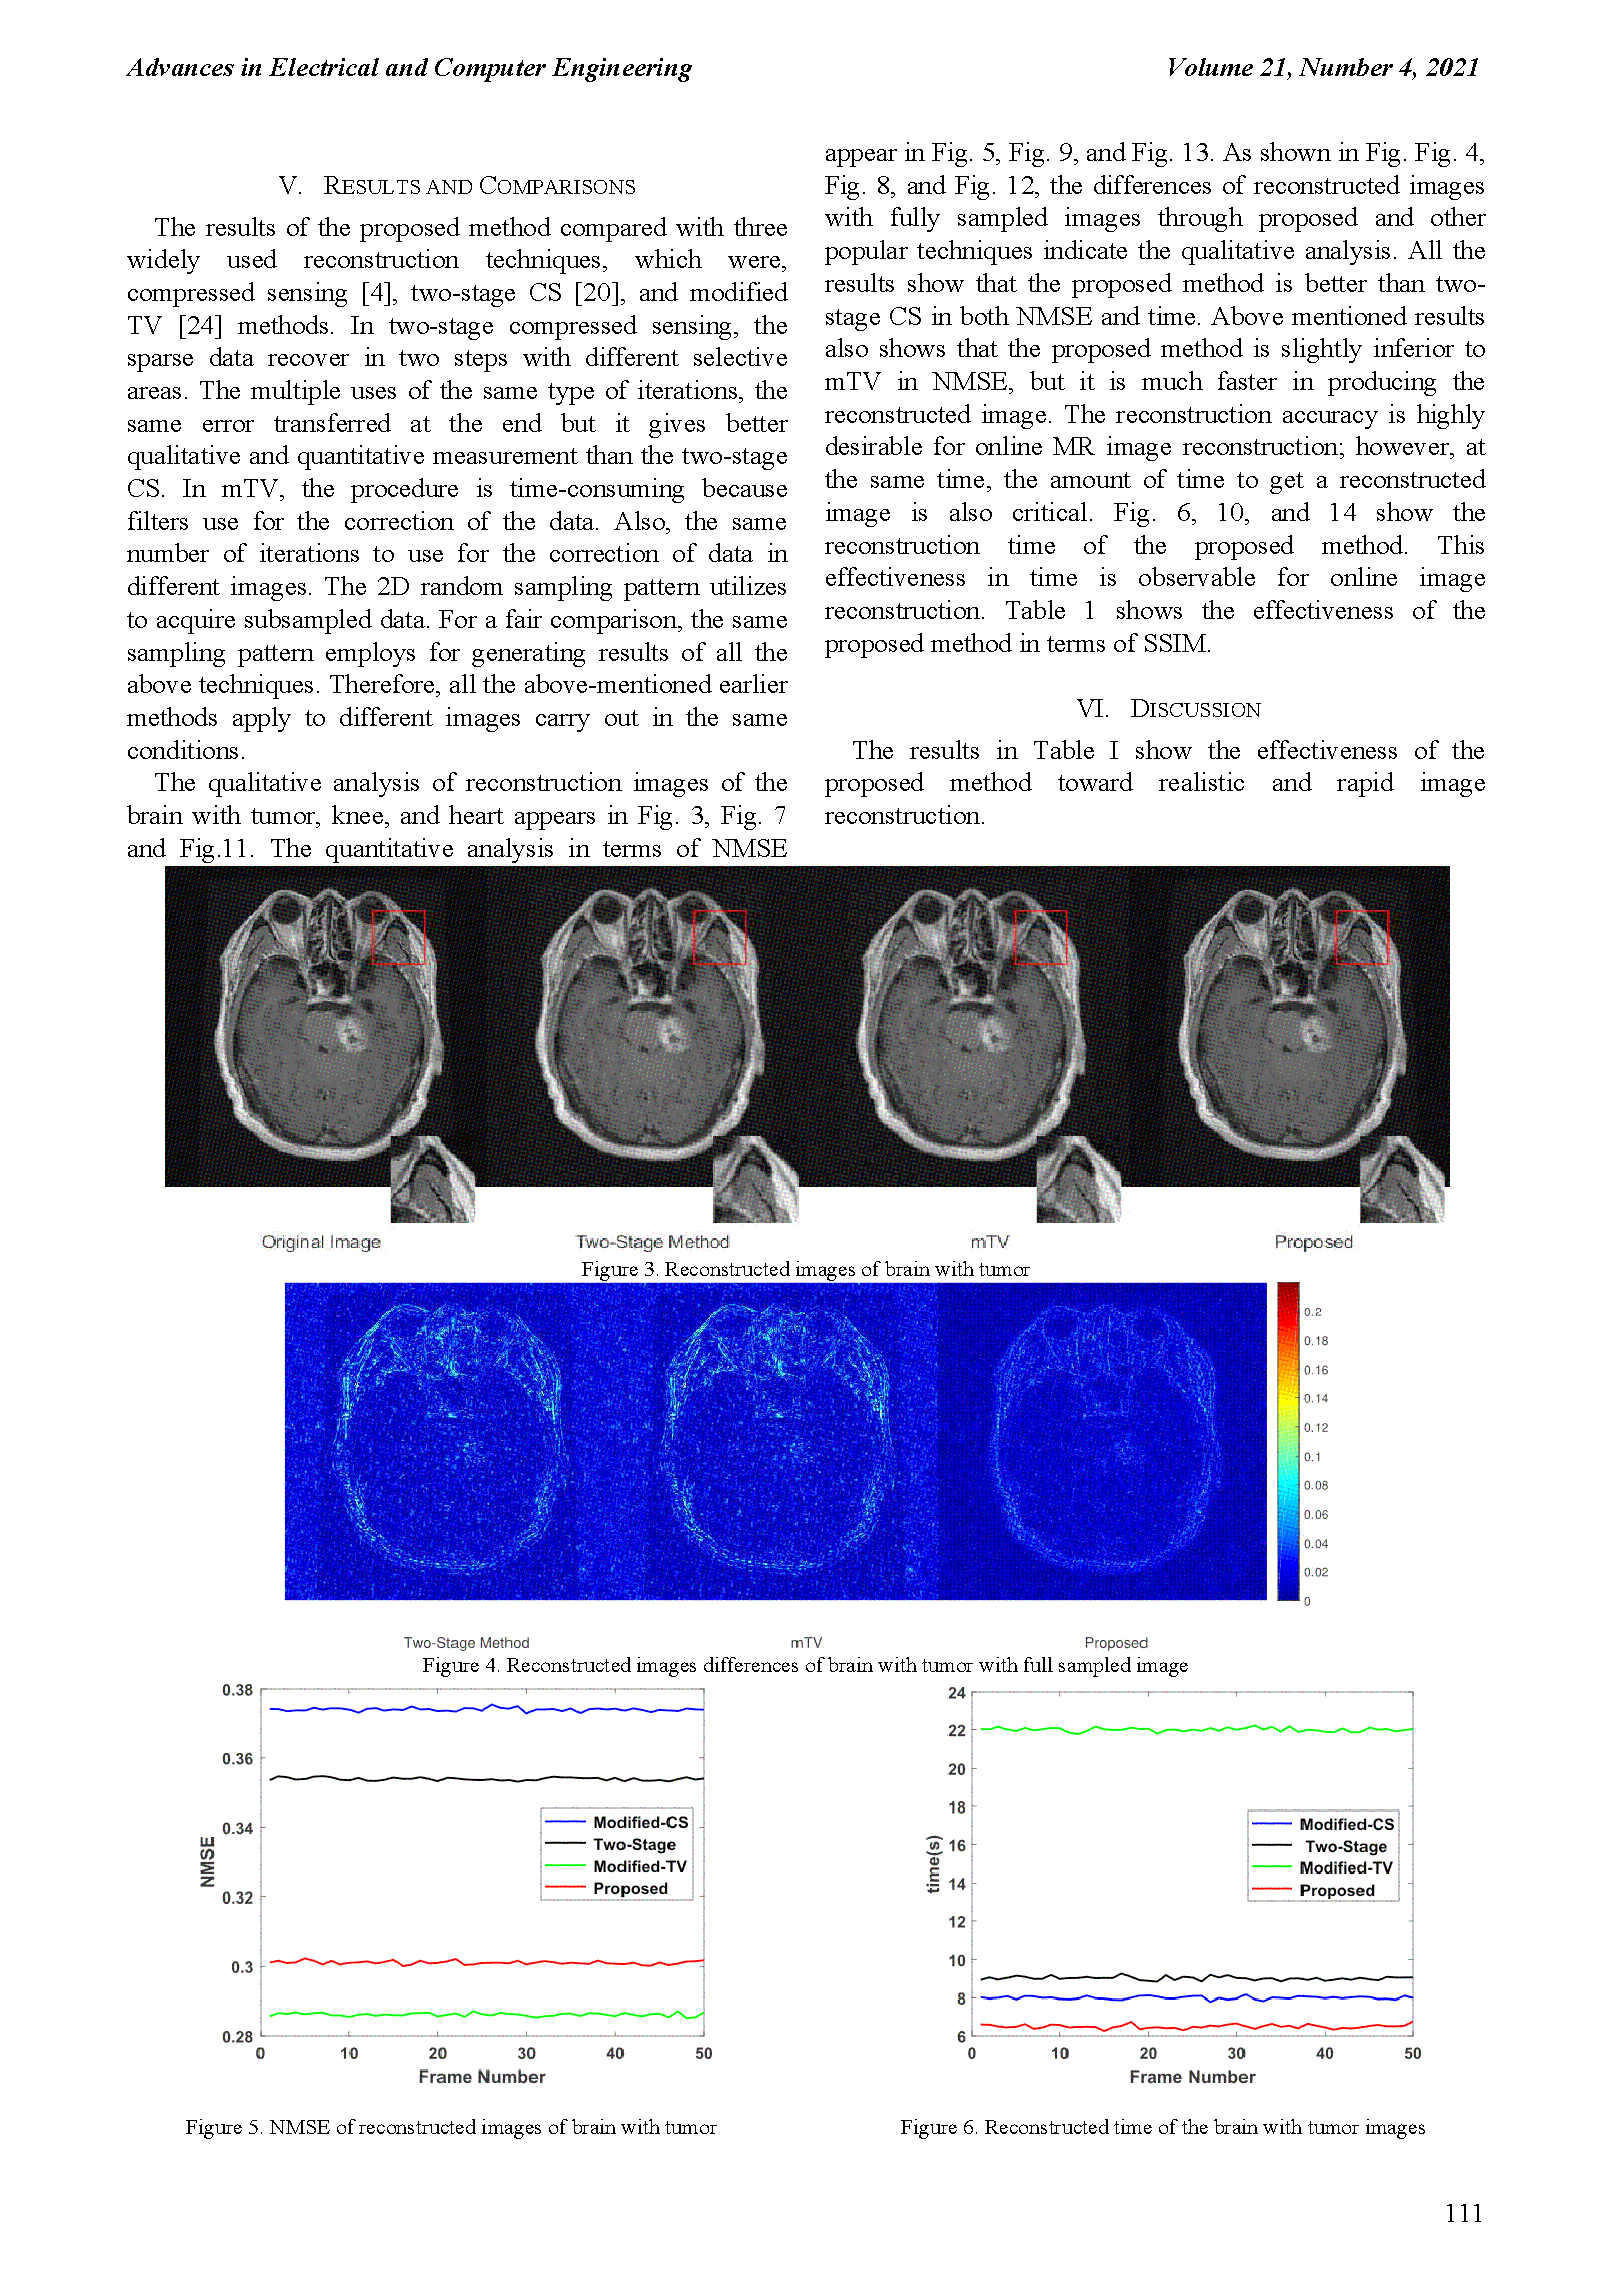 PDF Quickview for paper with DOI:10.4316/AECE.2021.04012